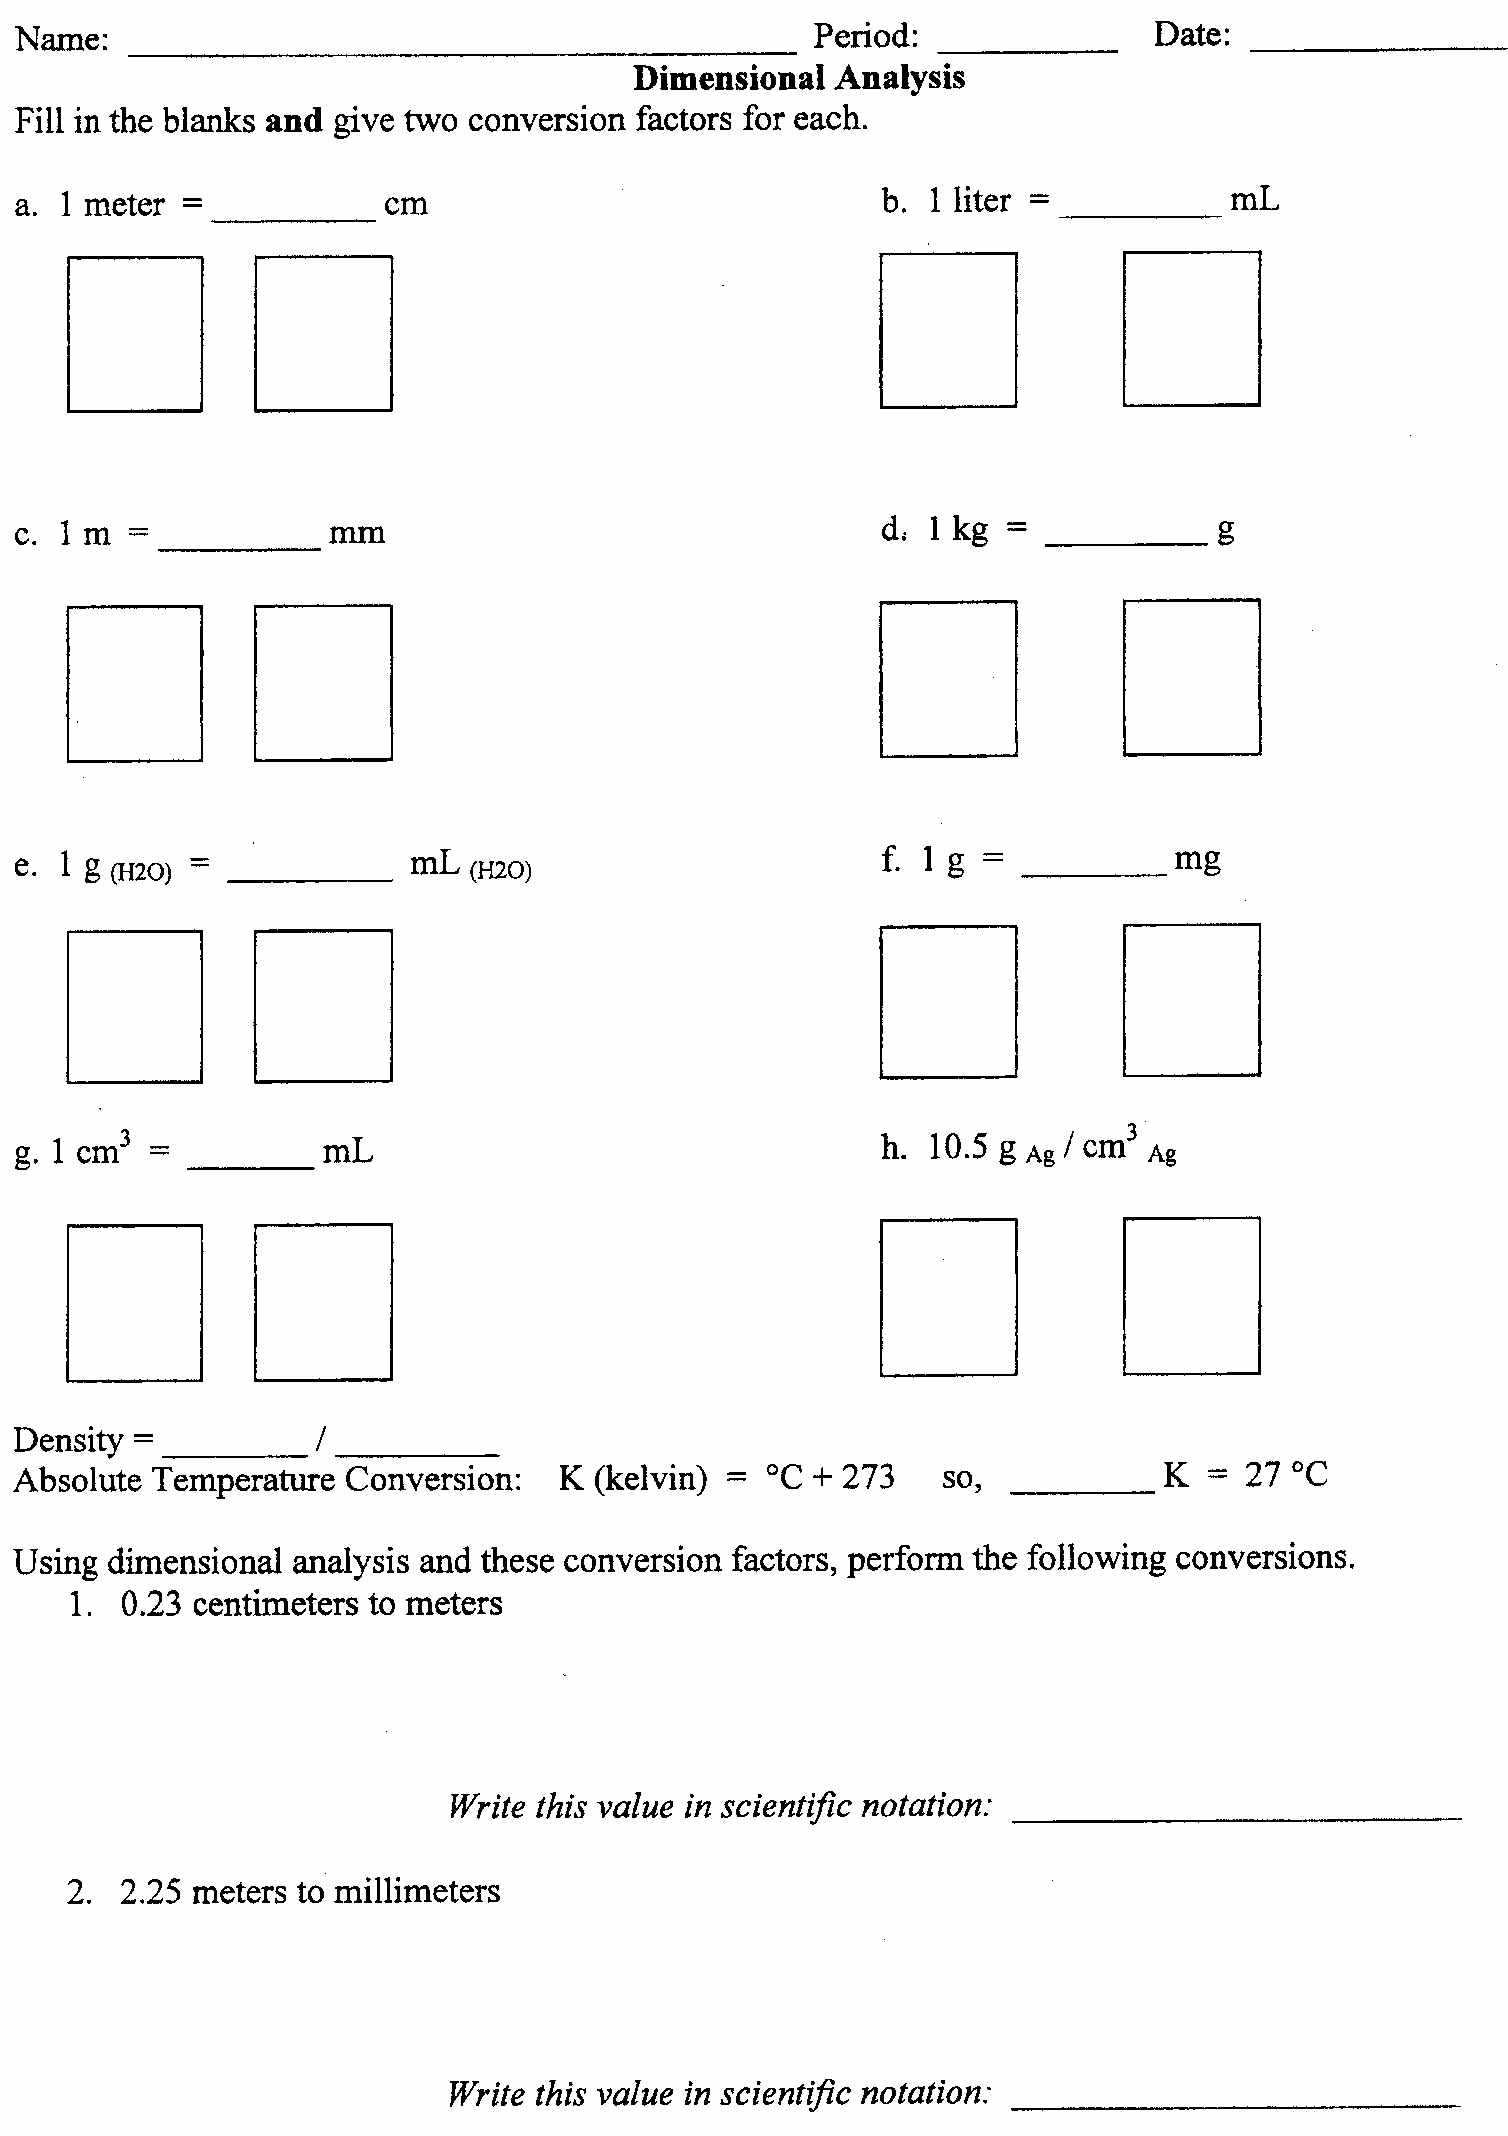 Cartoon Analysis Worksheet Answer Key Along with Conversions with Dimensional Analysis Worksheet Worksheet